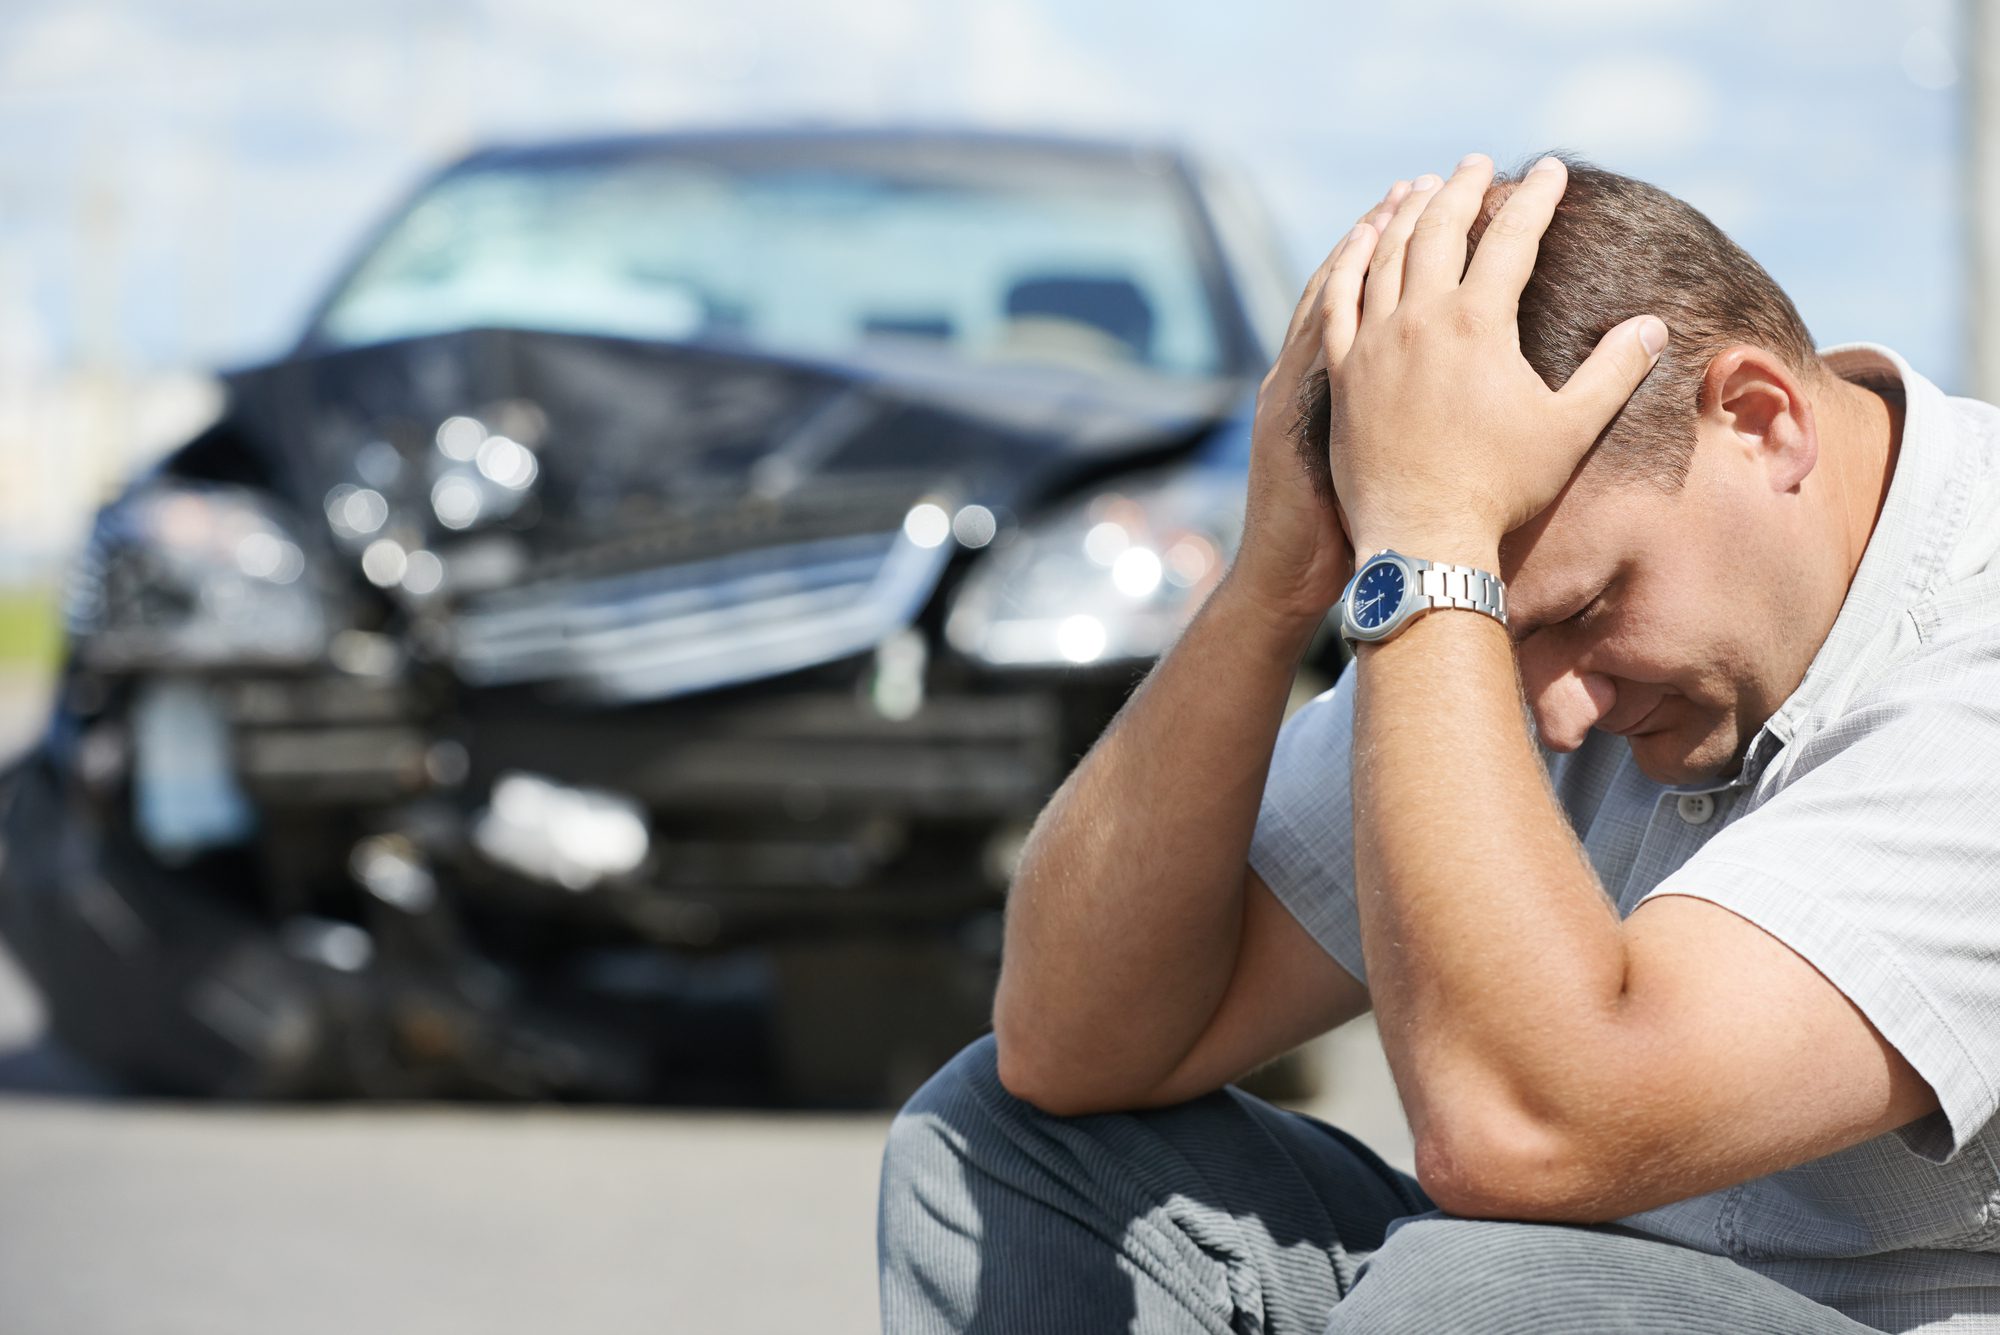 What to do in a car accident